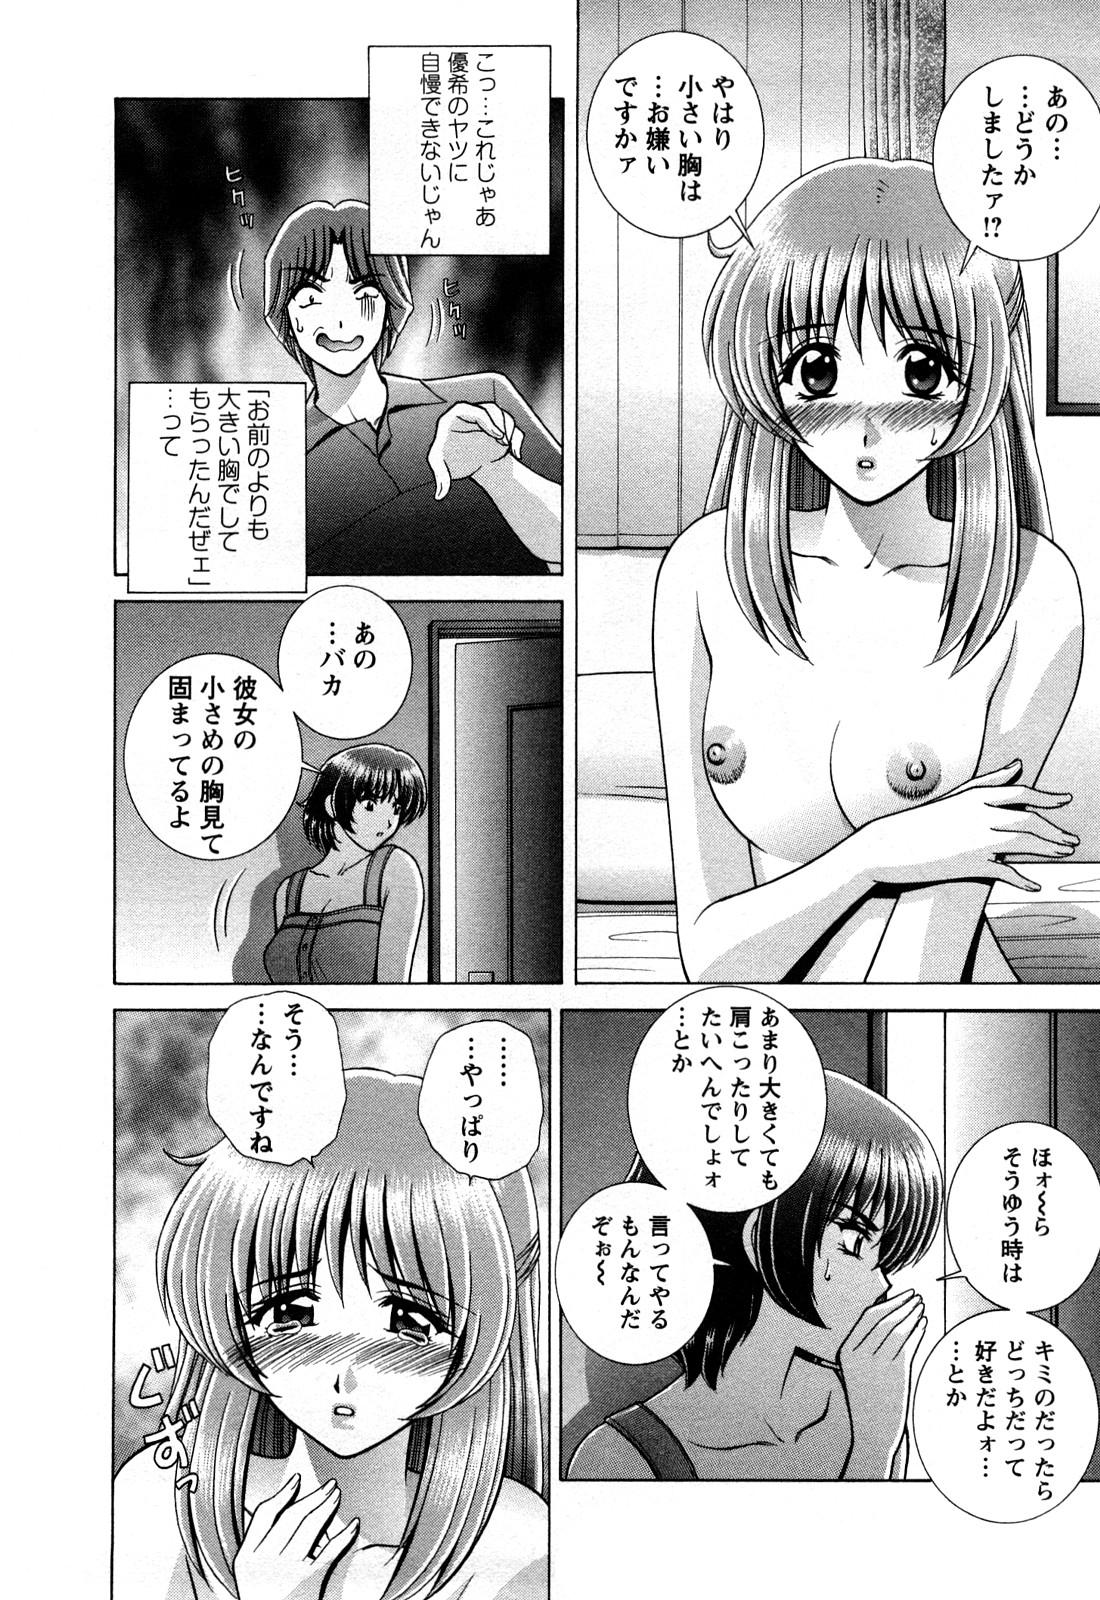 Masterbate Battle Oppai Curious - Page 10